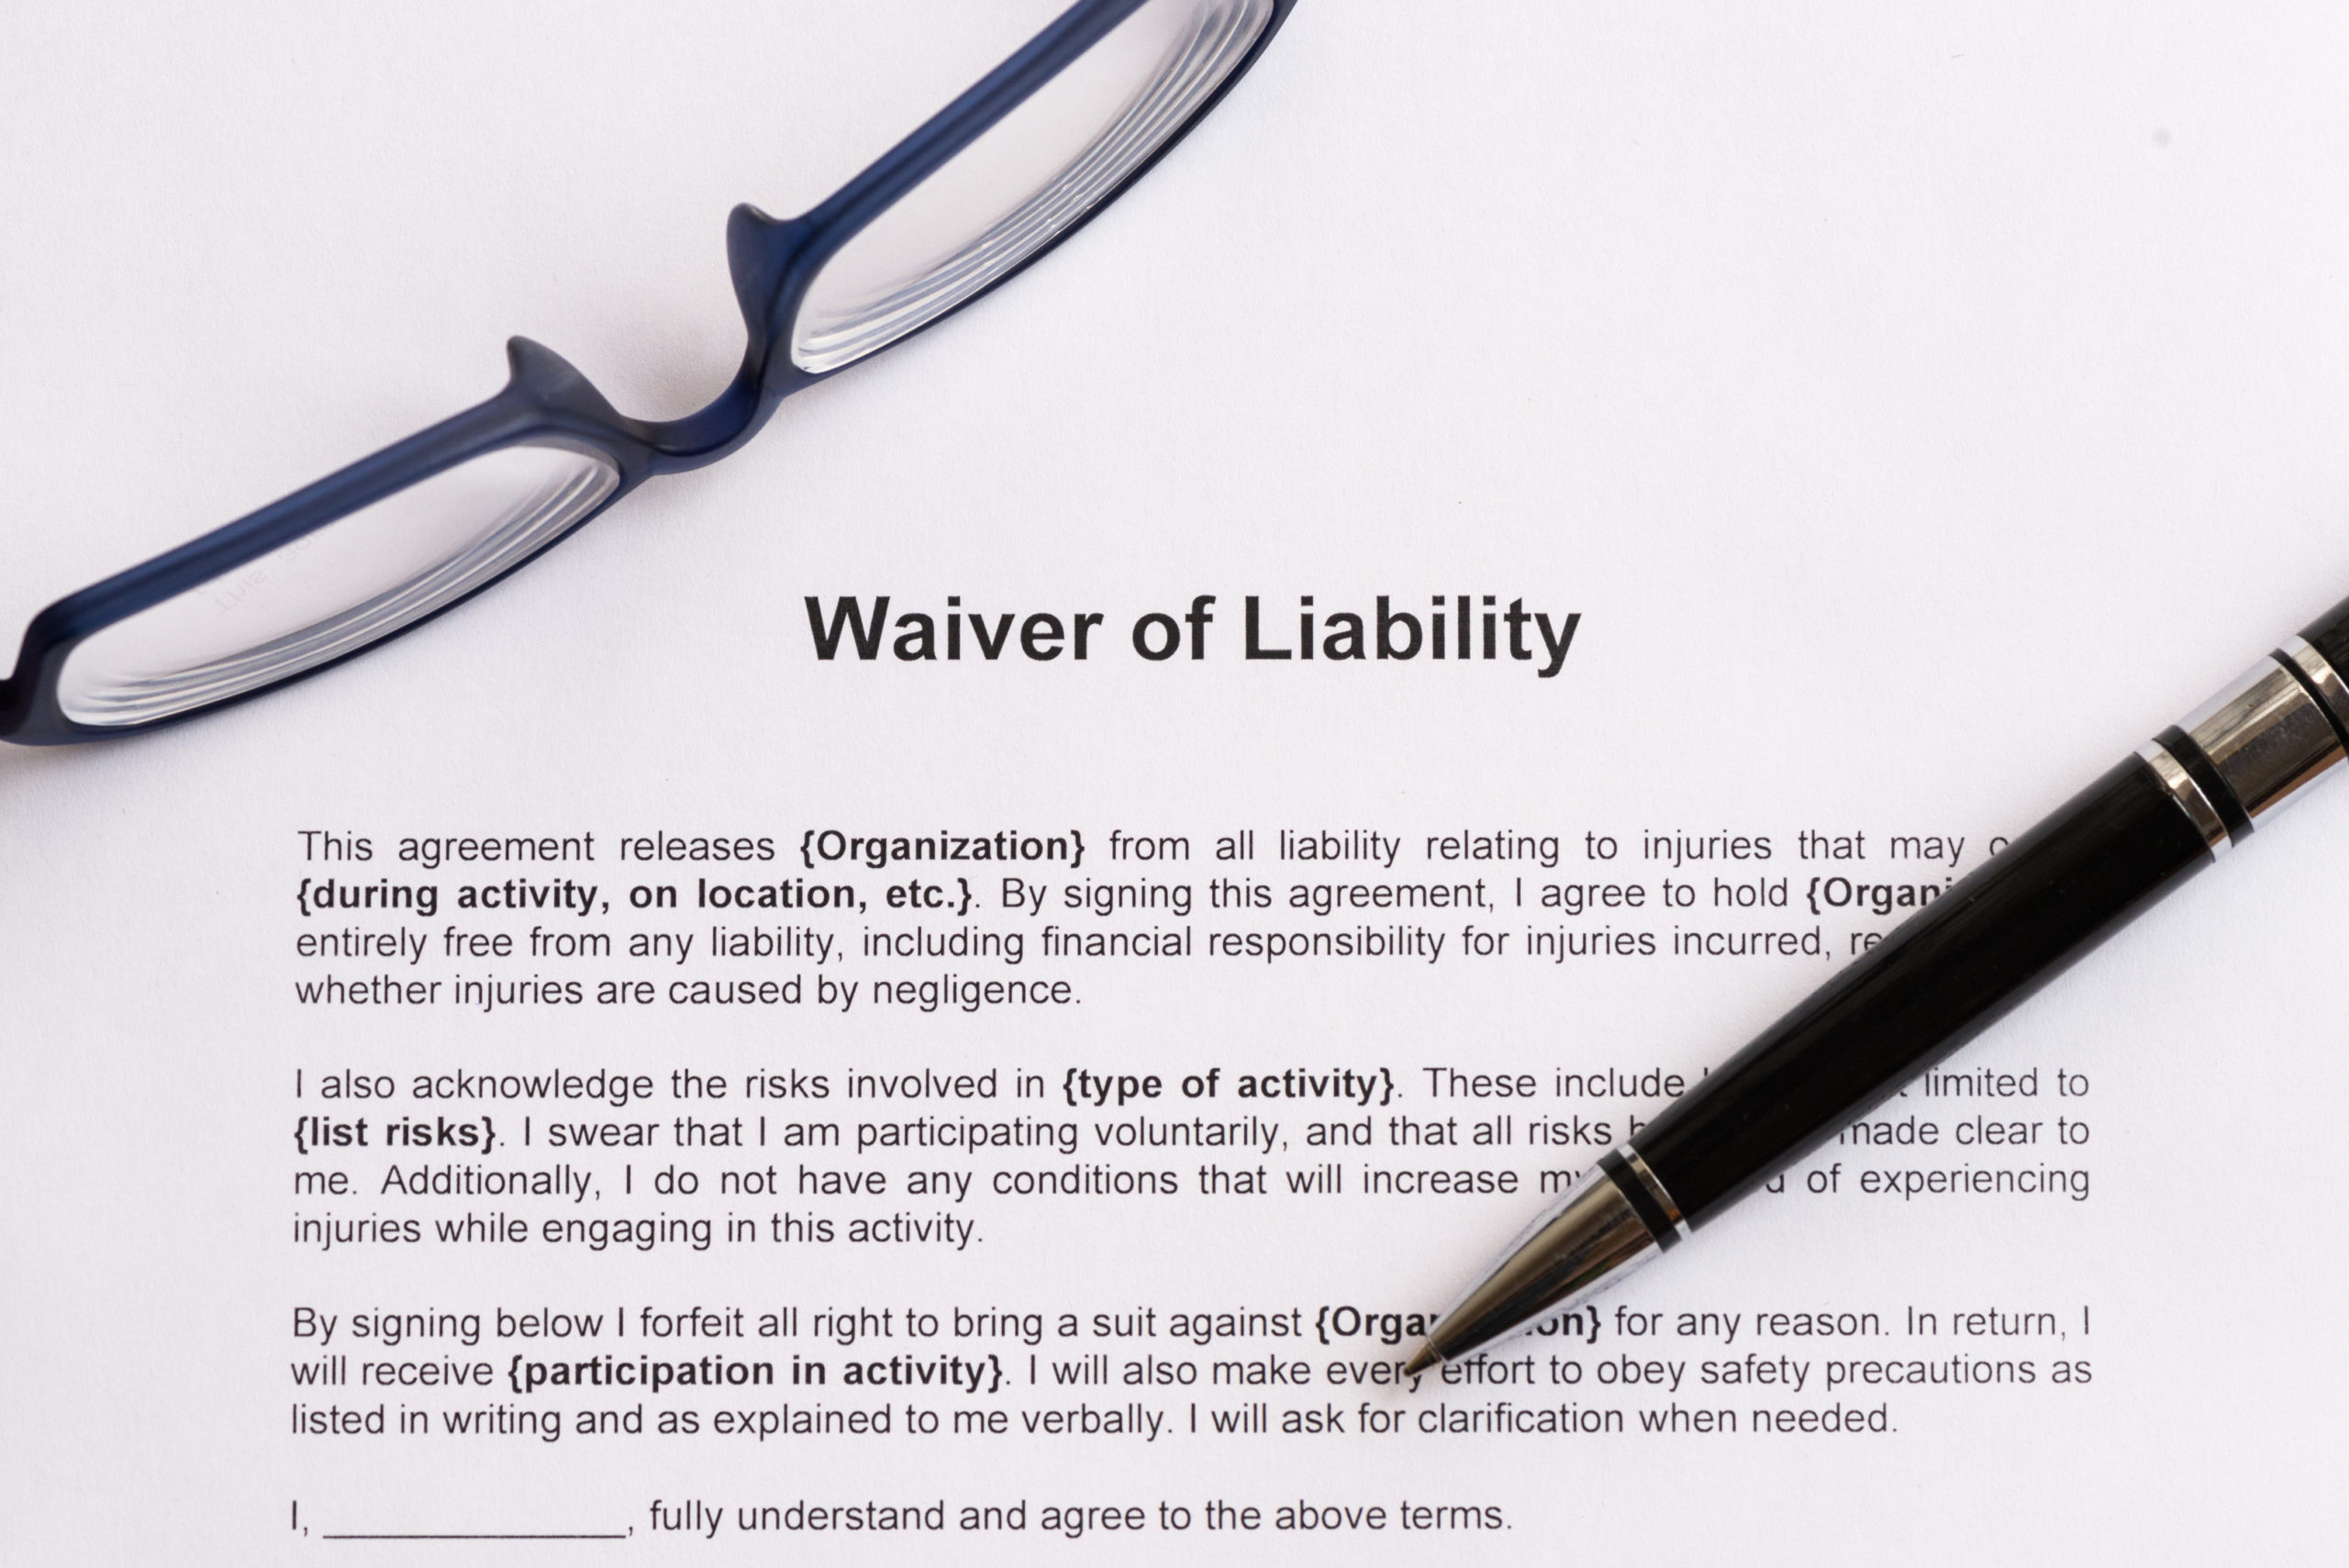 Business Liability Waivers During COVID-19